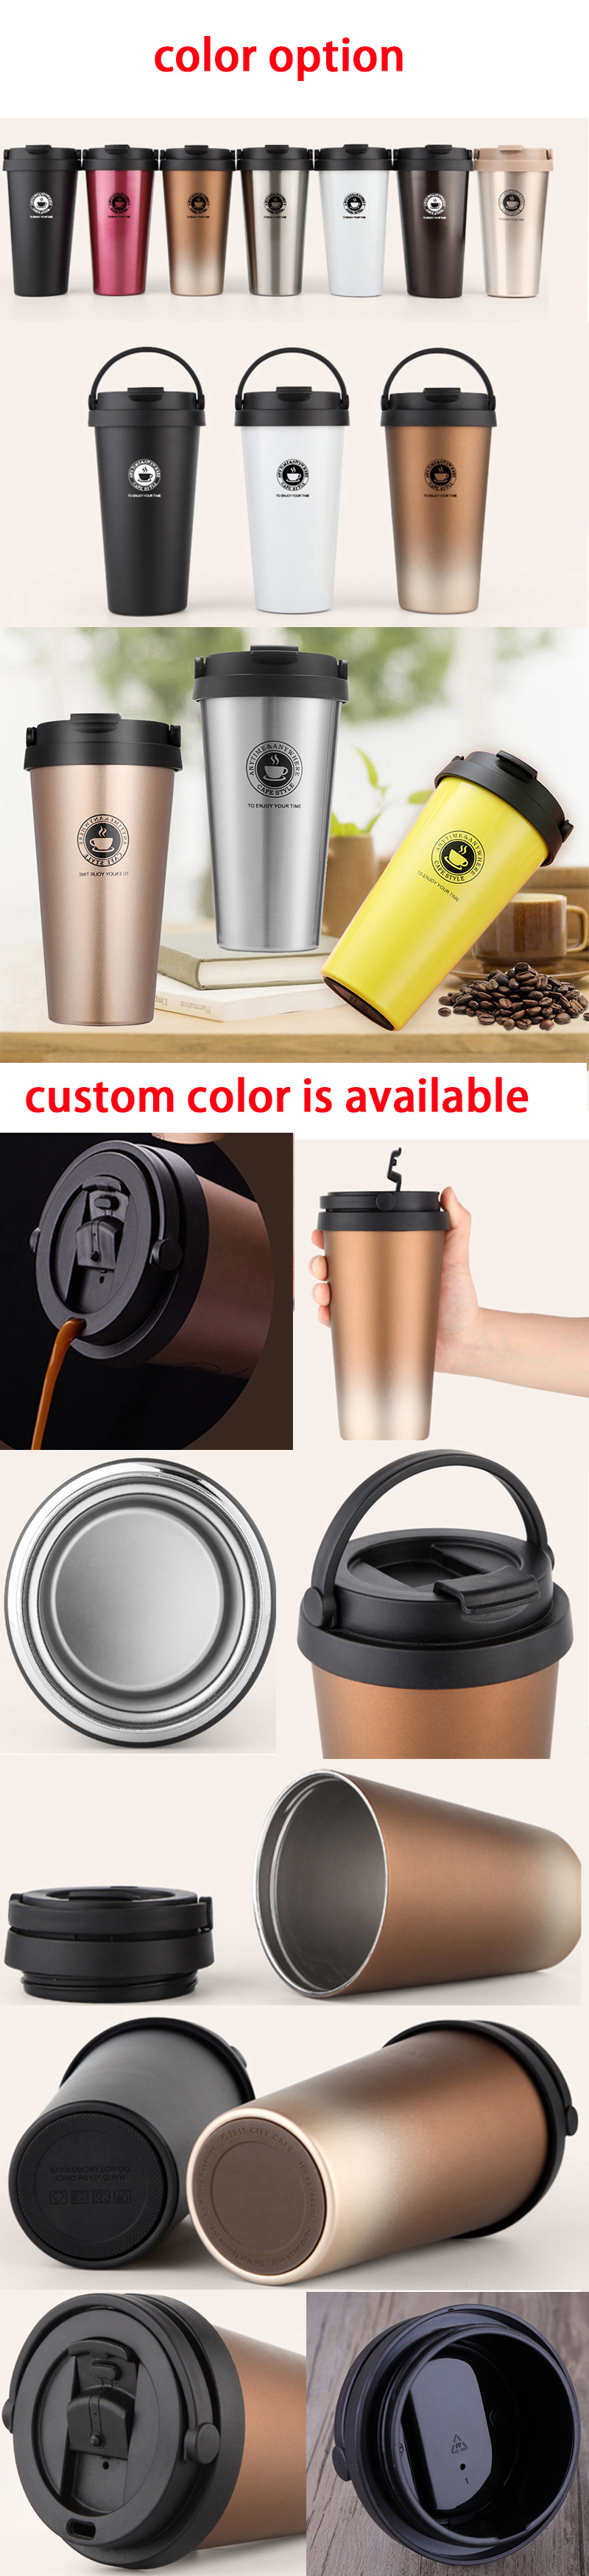 500ml 17oz 450ml Stainless Steel Double Walled Insulated Coffee Mug